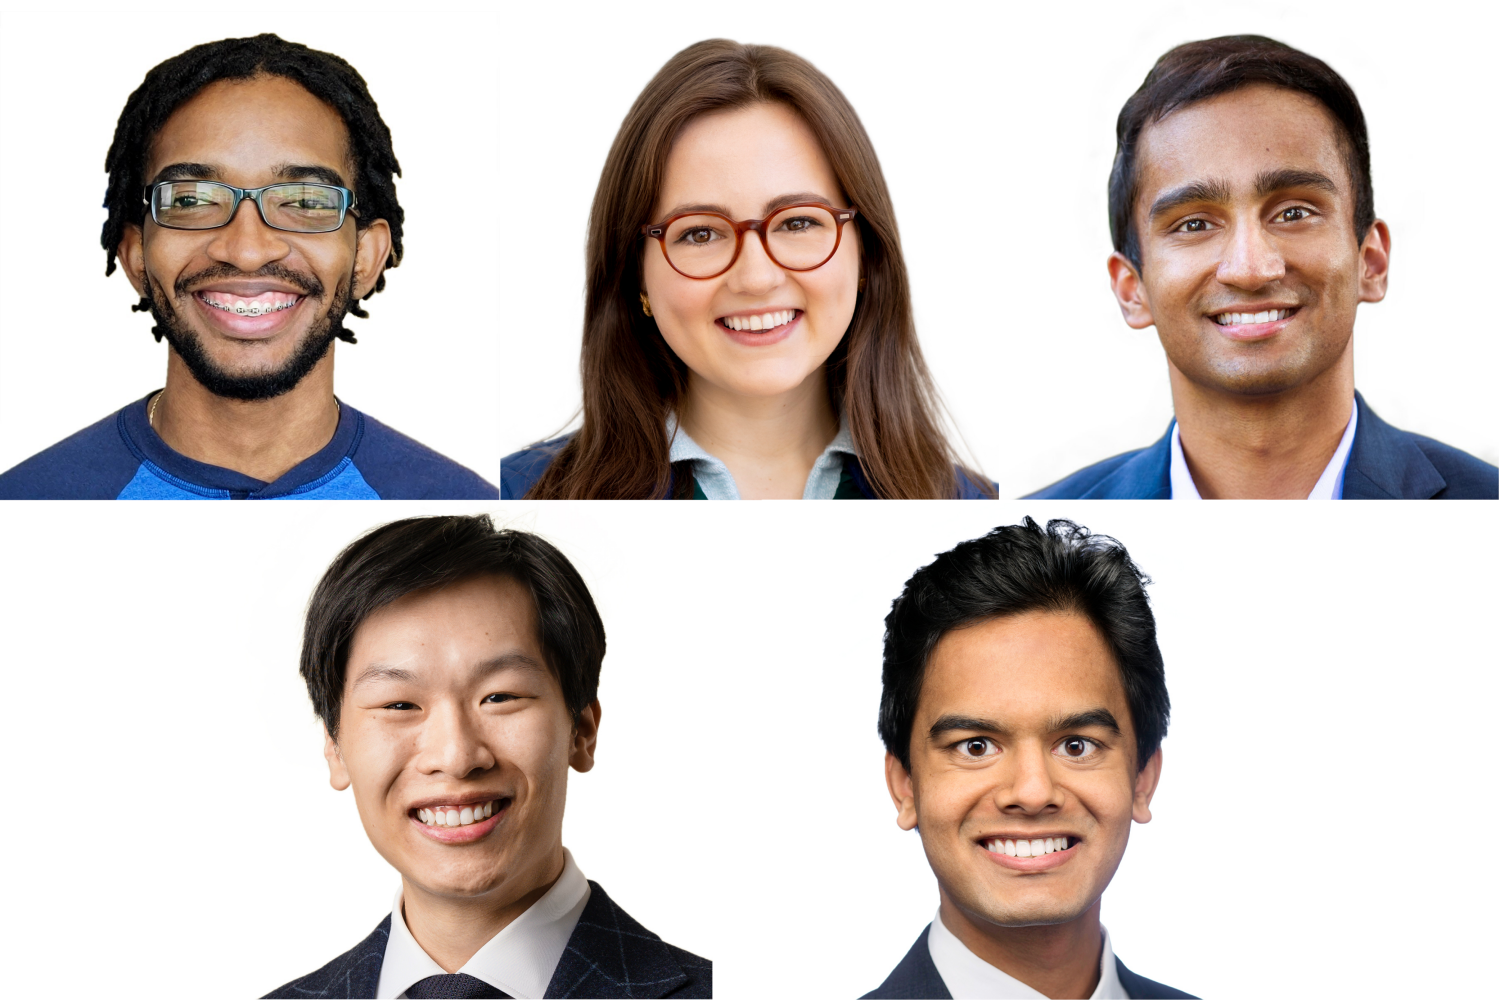 The 2023 P.D. Soros Fellowship winners with MIT ties are (clockwise from top left): Desmond Edwards, Kat Kajderowicz, Vaibhav Mohanty, Shomik Verma, and Steven Truong. 